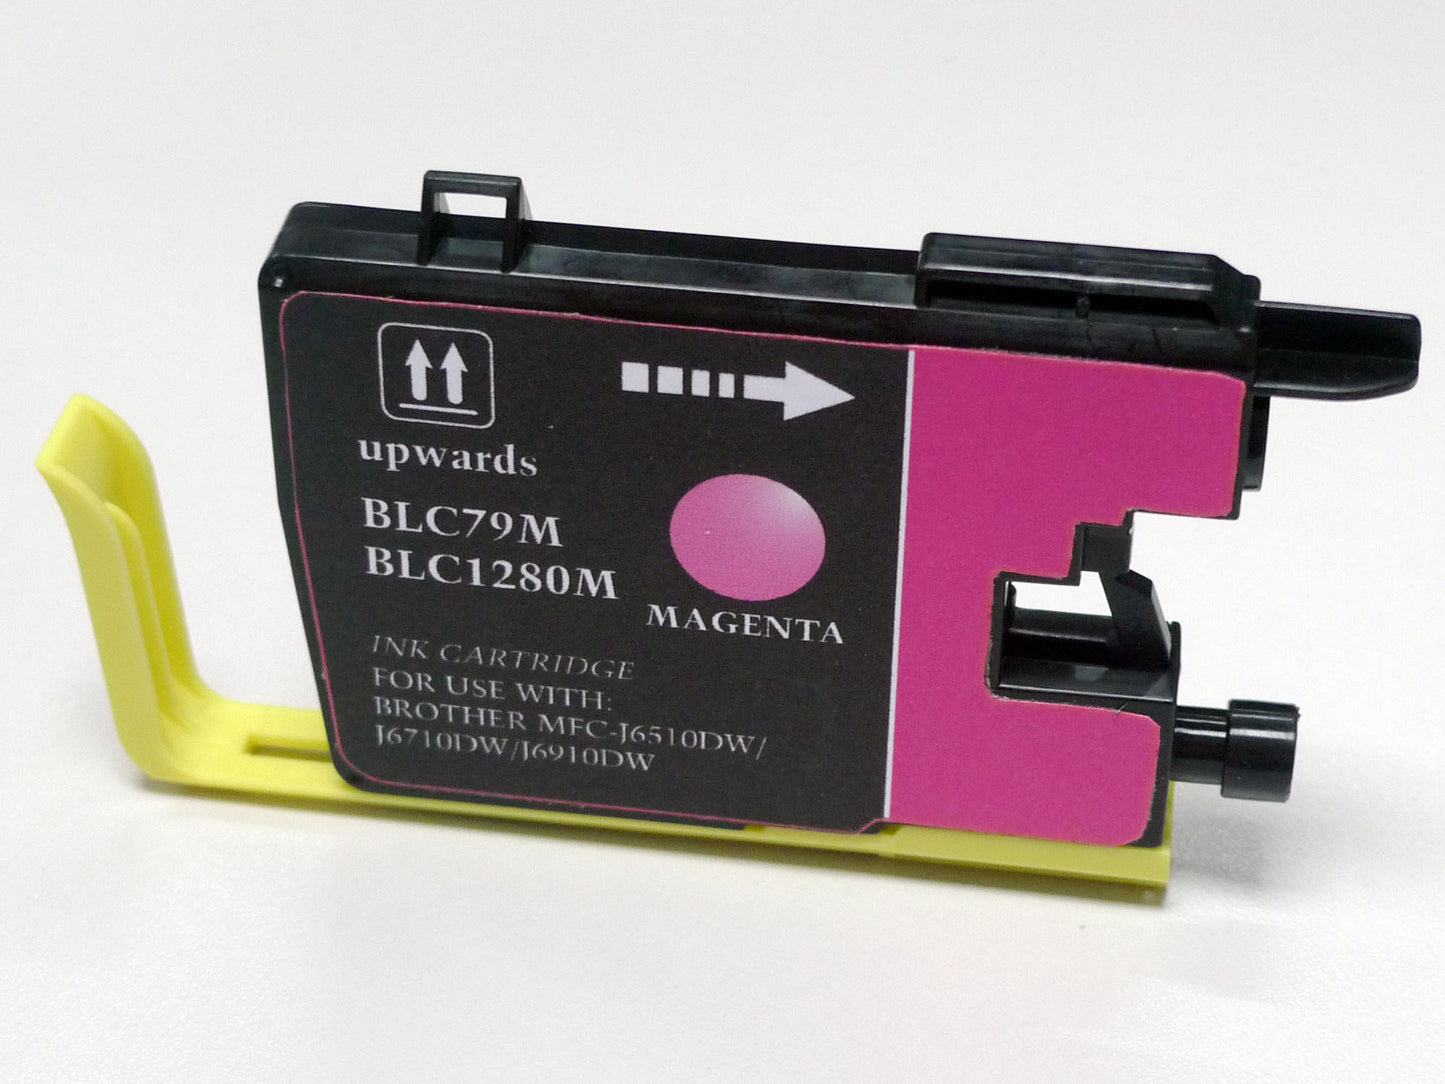 Compatible Brother LC79 BK/C/M/Y Ink Cartridge